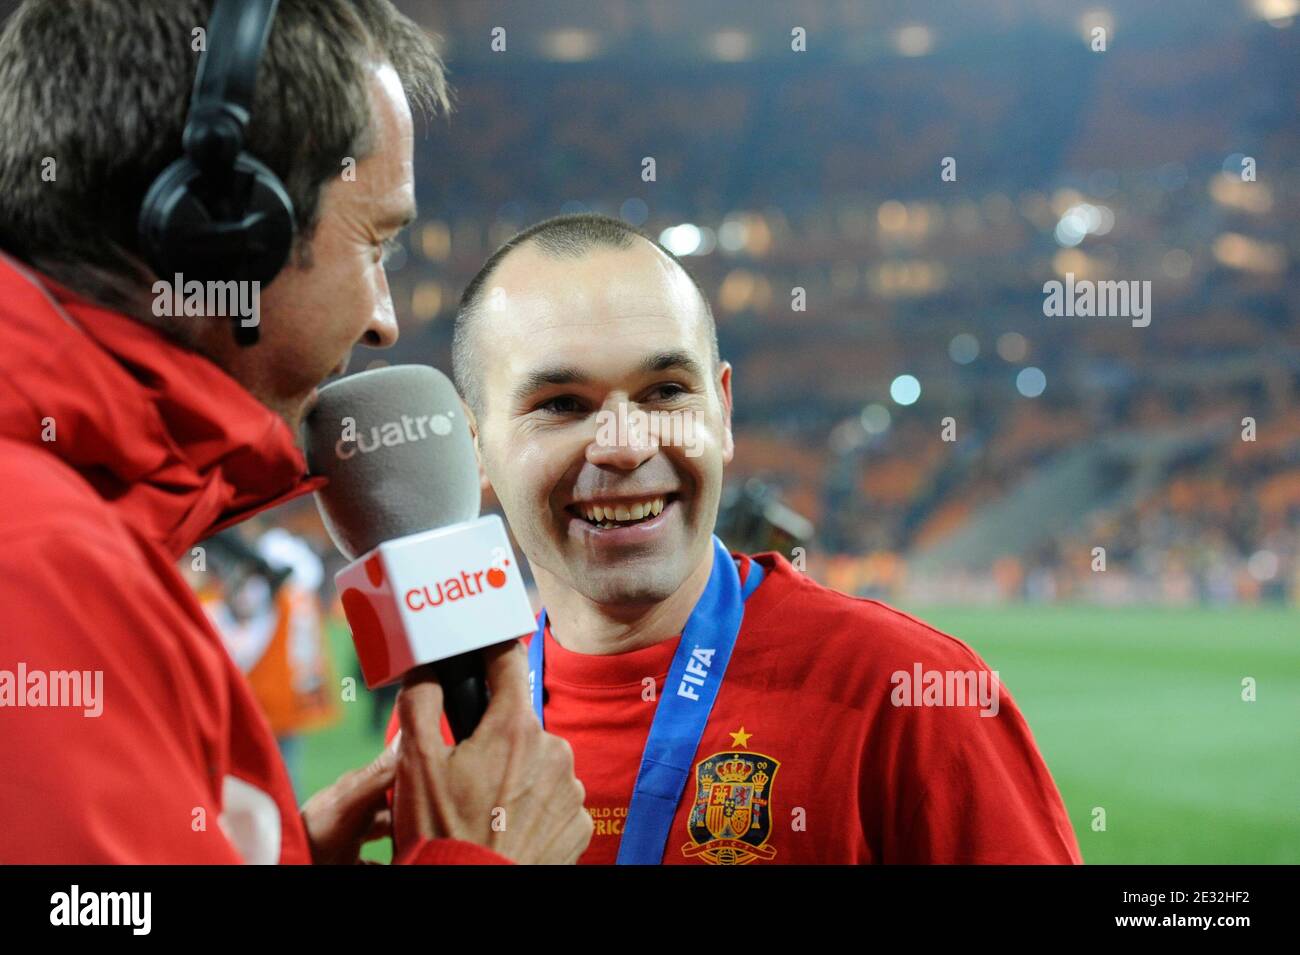 Spain's Andres Iniesta after winning the 2010 FIFA World Cup South Africa Final Soccer match, Spain vs Netherlands at Soccer City football stadium in Johannesburg, South Africa on July 11th, 2010. Spain won 1-0. Photo by Henri Szwarc/ABACAPRESS.COM Stock Photo